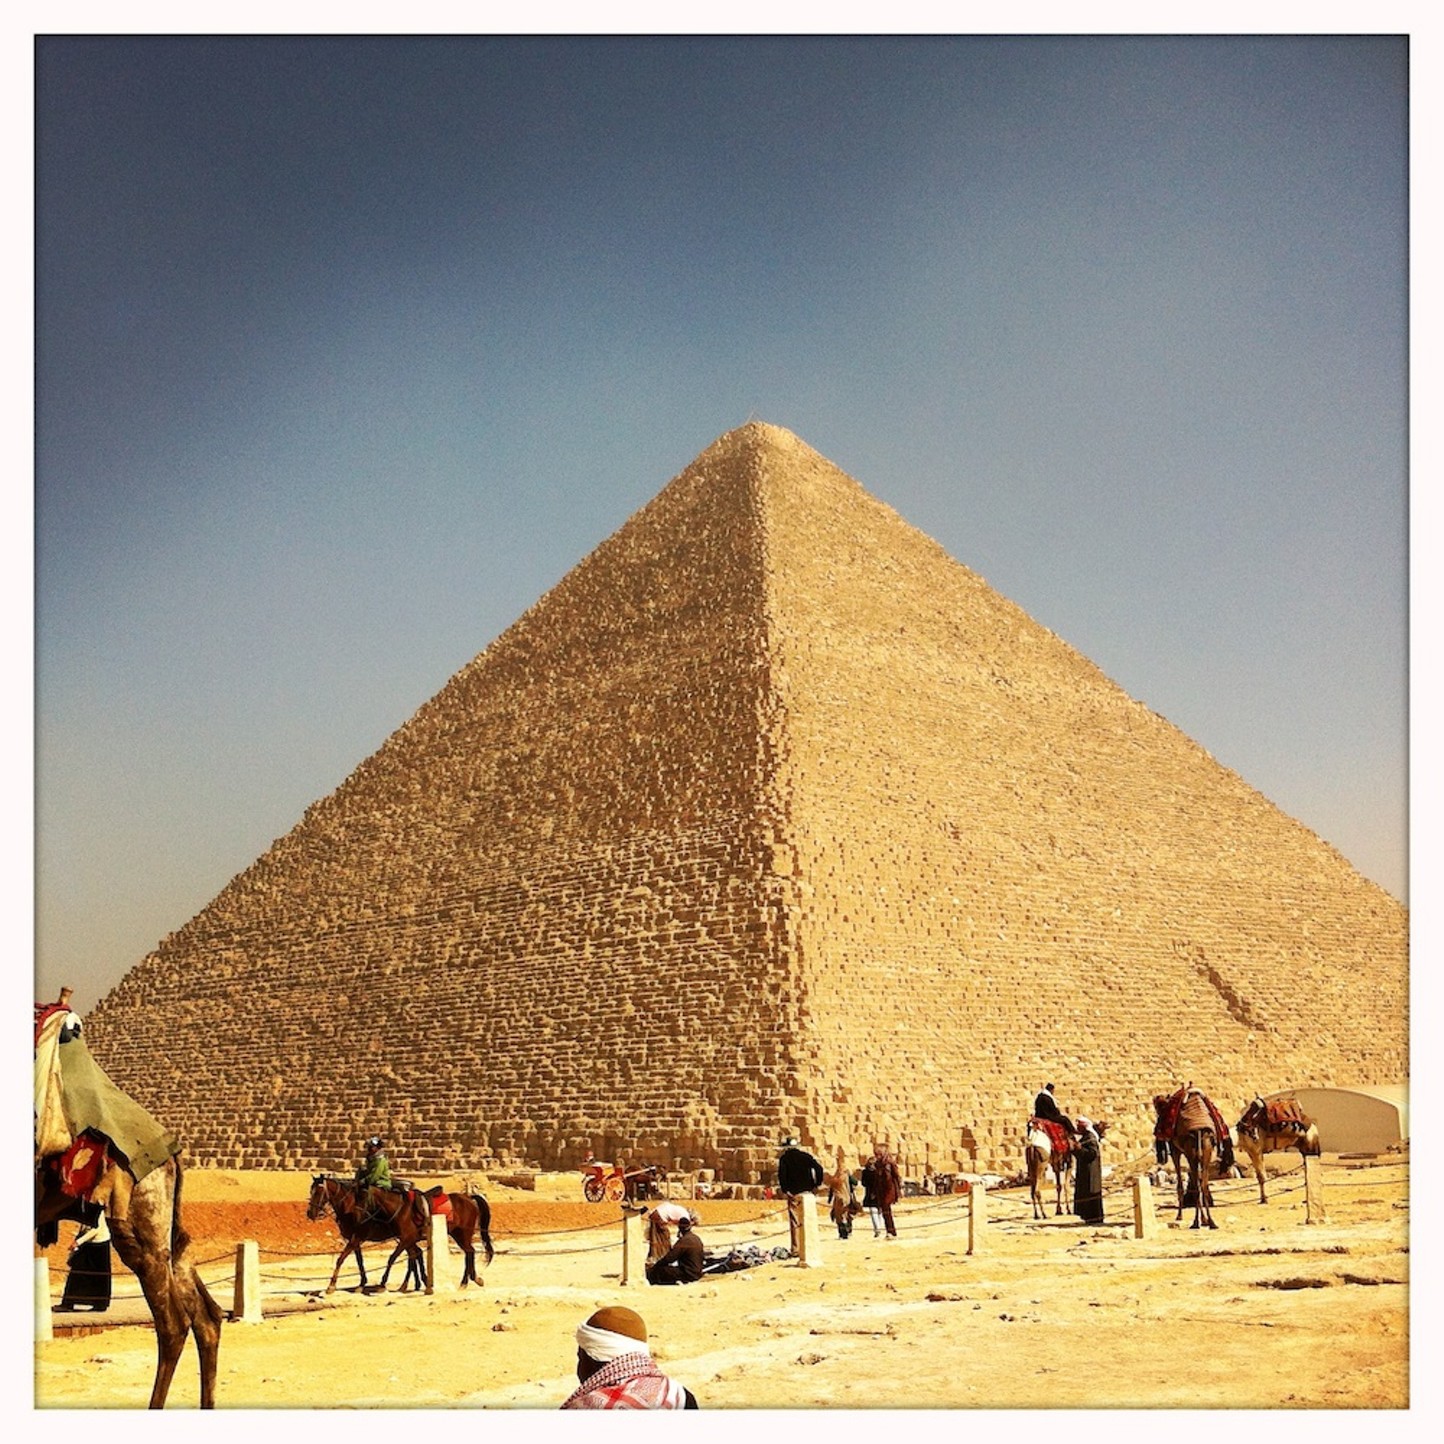 Egypt's Pyramids and Temples